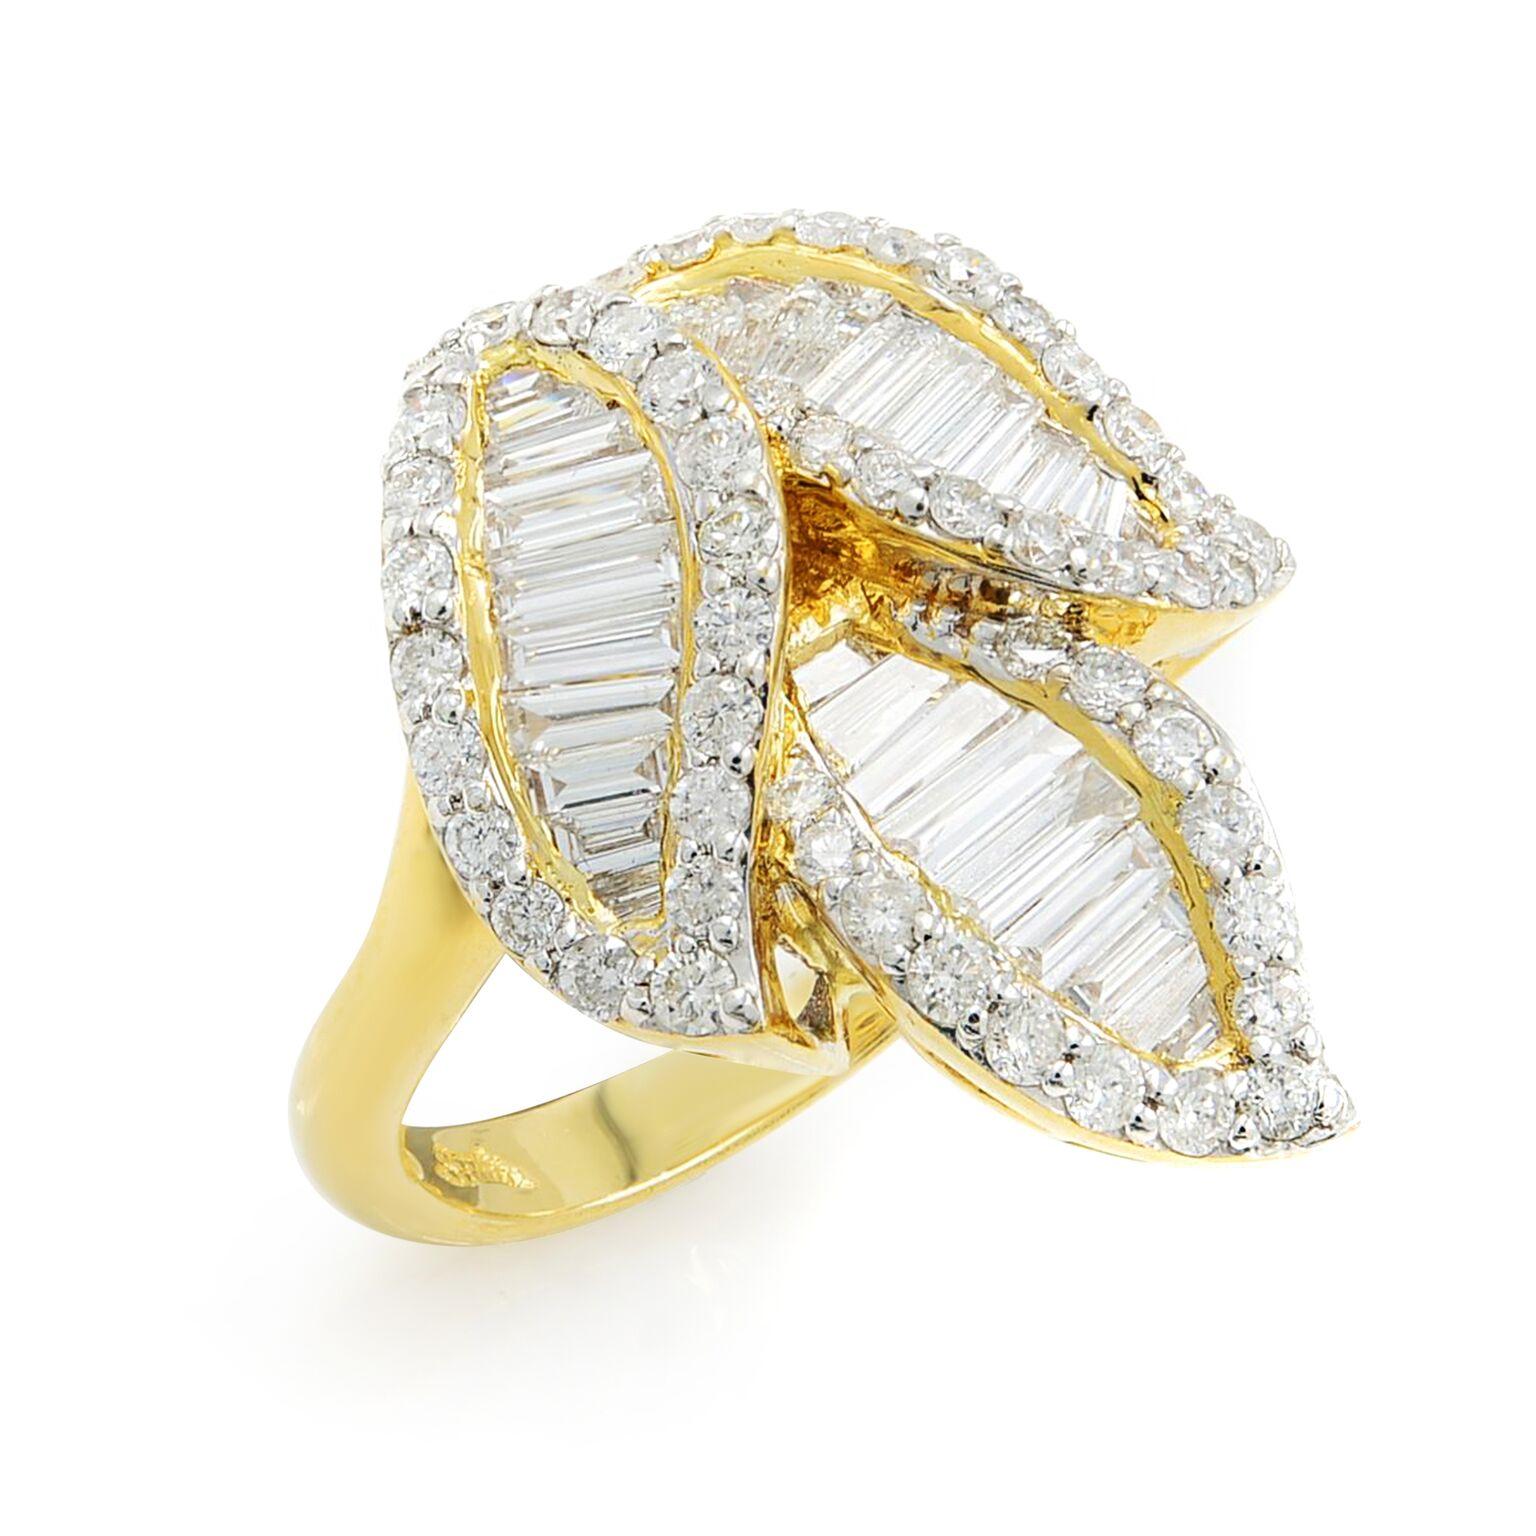 This exemplary and versatile jewel mounted in 18k Yellow Gold incorporates classic Art Deco geometry with an added dose of mid-20th-century flash. The centerpiece is embellished with fans of tapered baguette diamonds with sparkling round brilliant